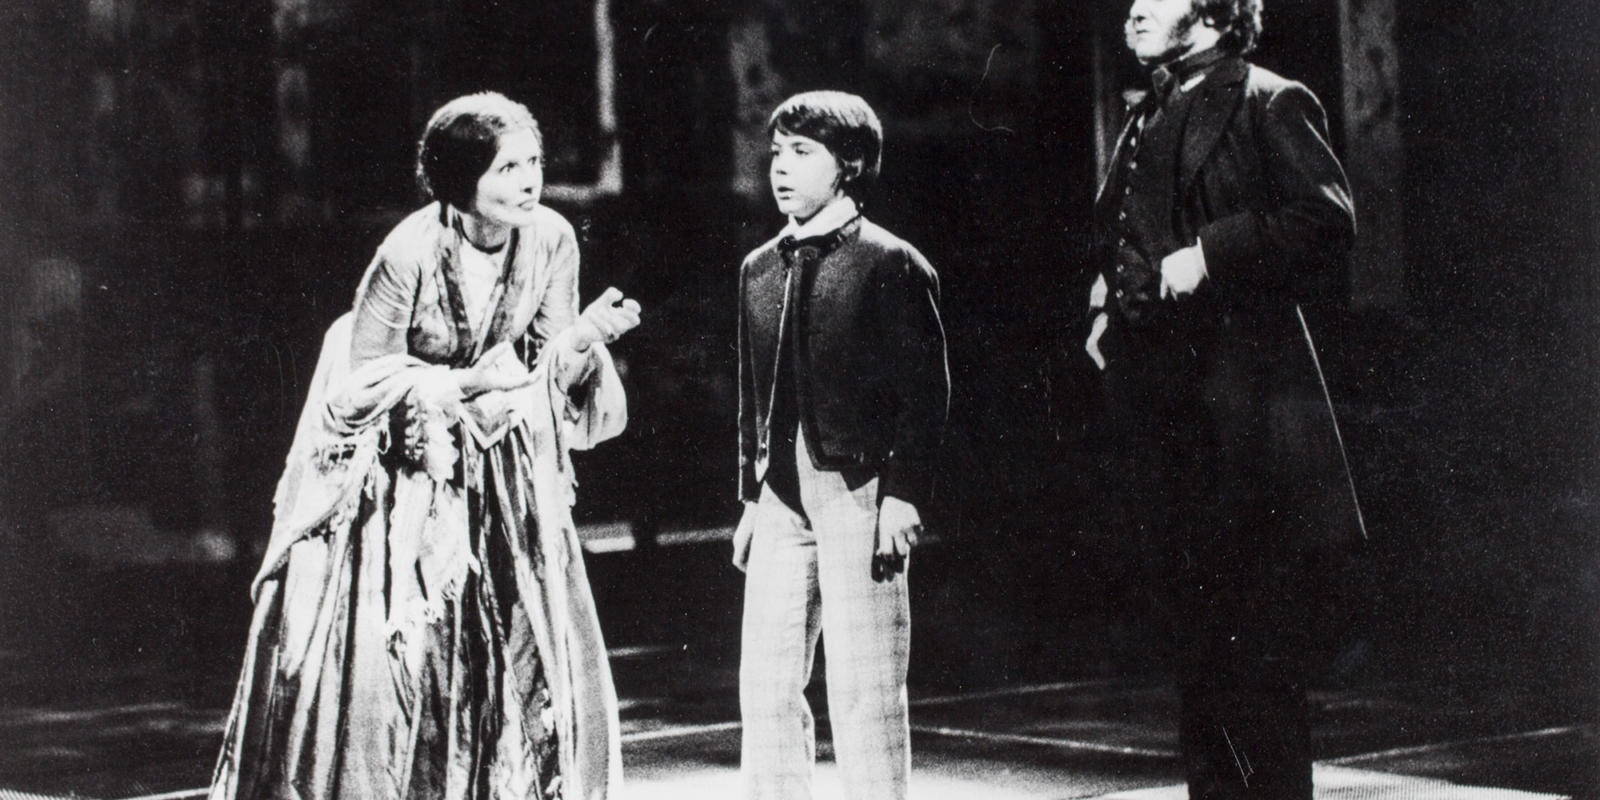 ENO The Turn of the Screw 1979: Eilene Hannan as The Governess and Michael Ginn as Miles with Phlip Langridge as Peter Quint. With thanks to Gareth Roberts.